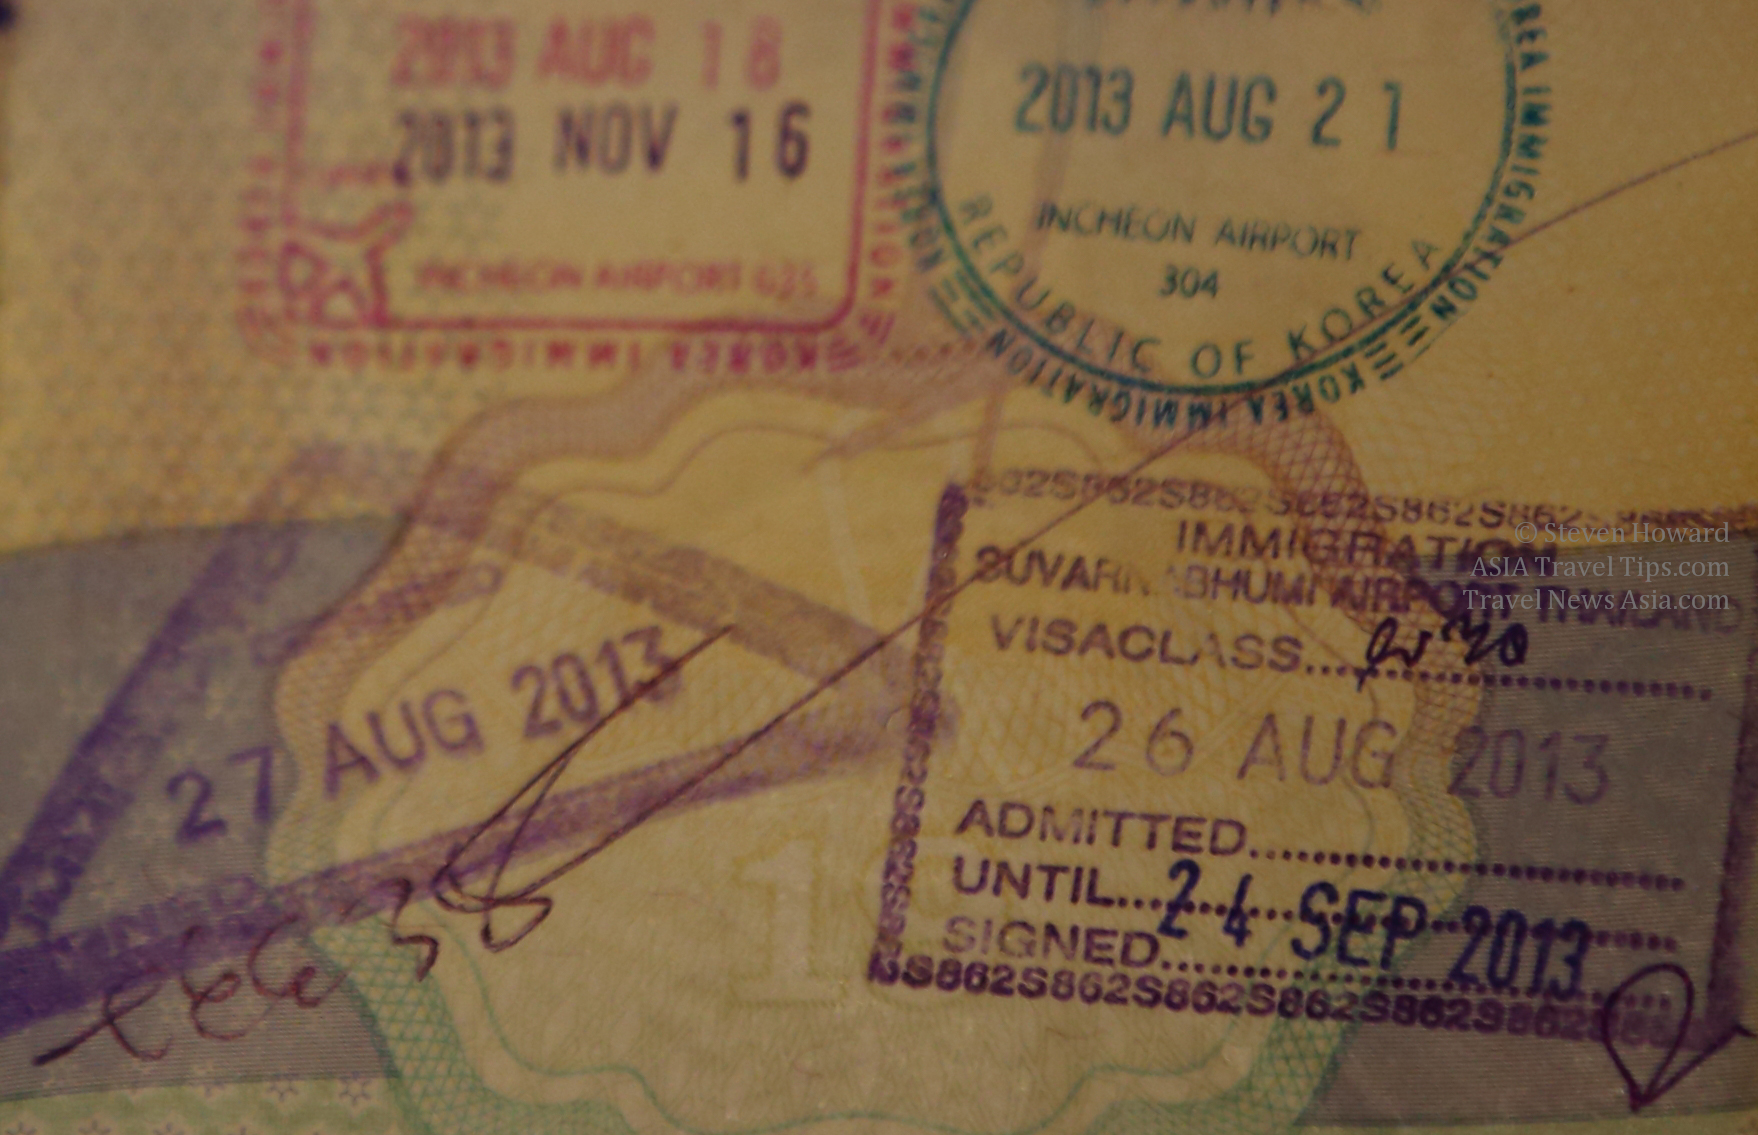 Stamps in a passport. Click to enlarge.